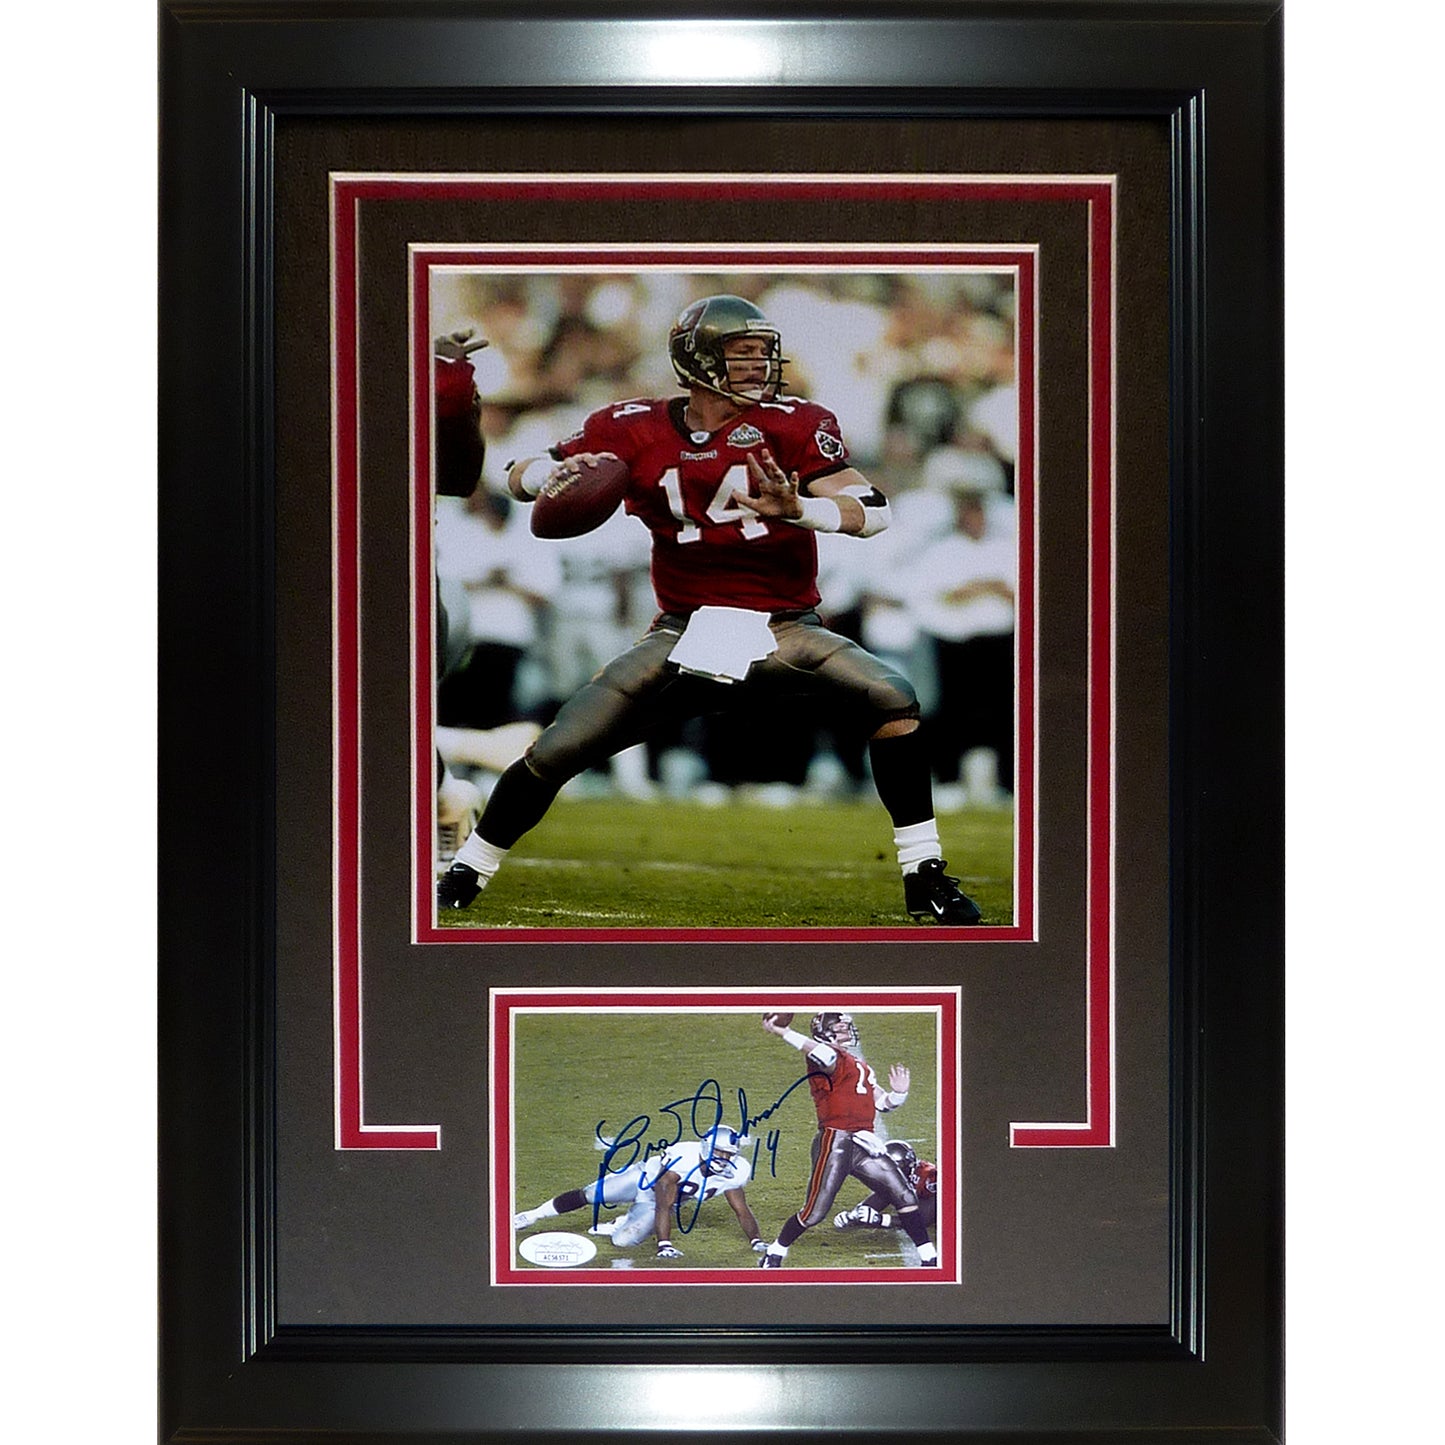 Brad Johnson Autographed Tampa Bay Buccaneers 4x6 photo Deluxe Framed with Super Bowl XXXVII 8x10 Photo – JSA